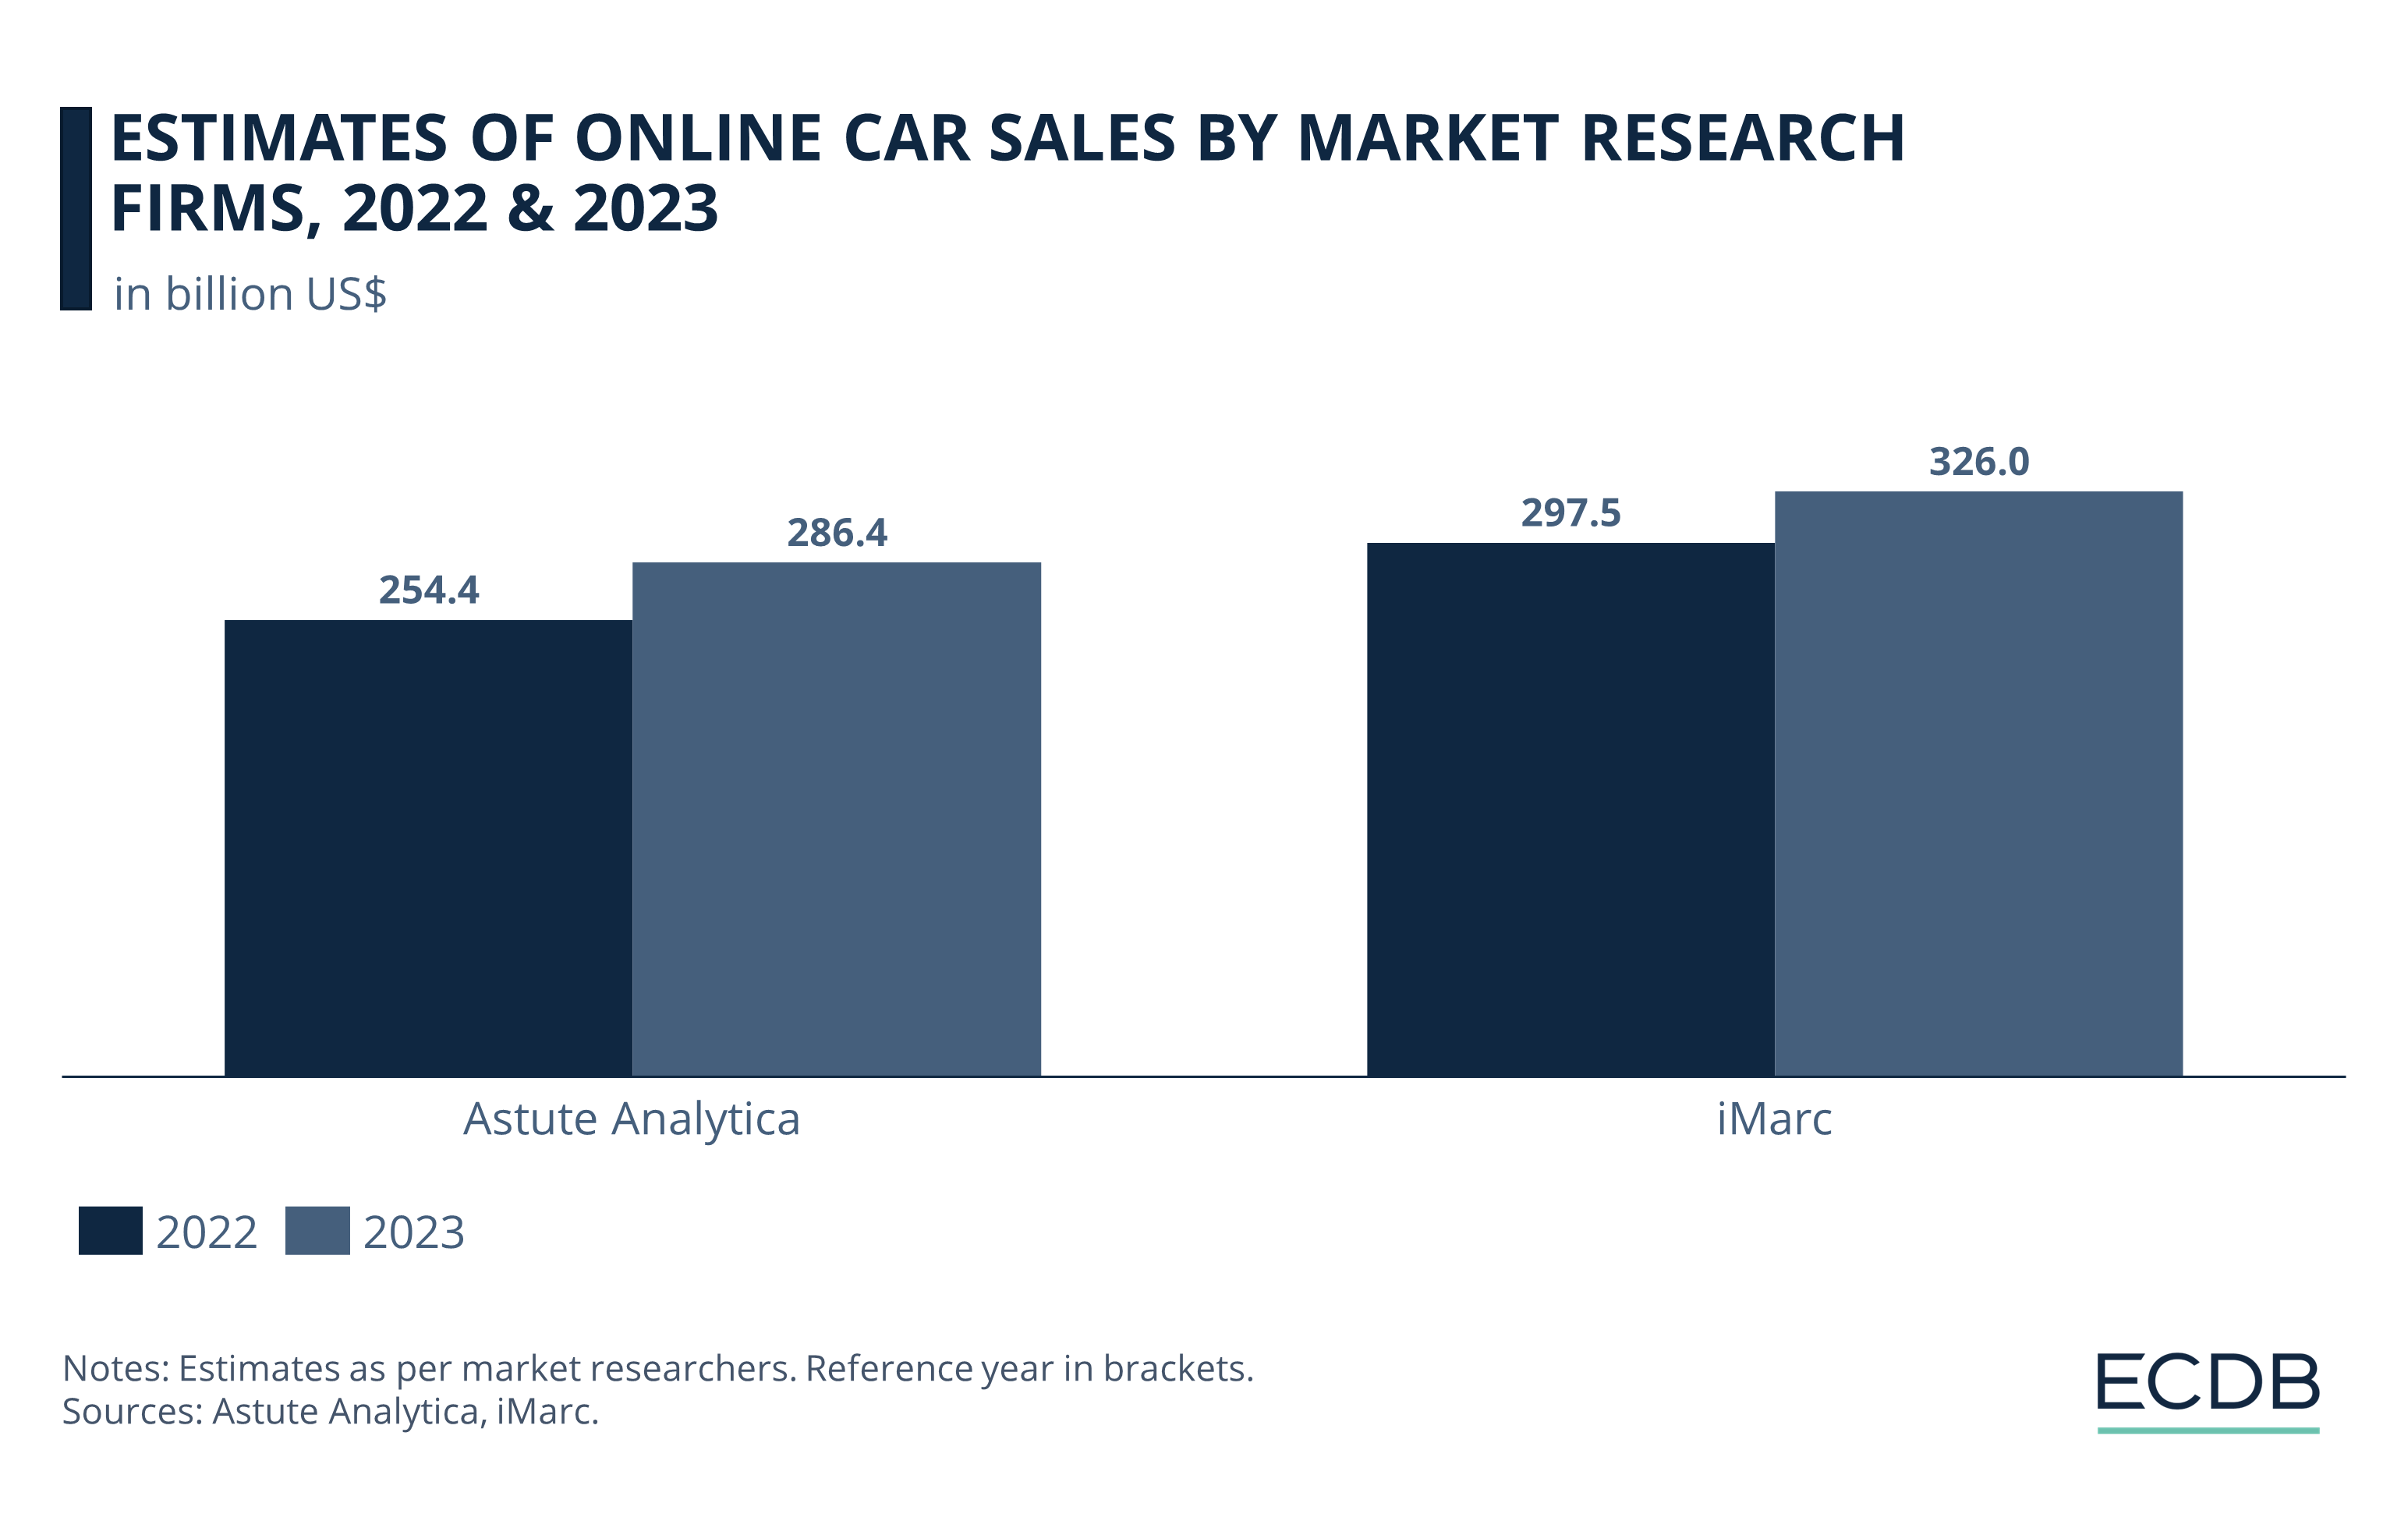 Estimates of Online Car Sales by Market Research Firms, 2022 & 2023